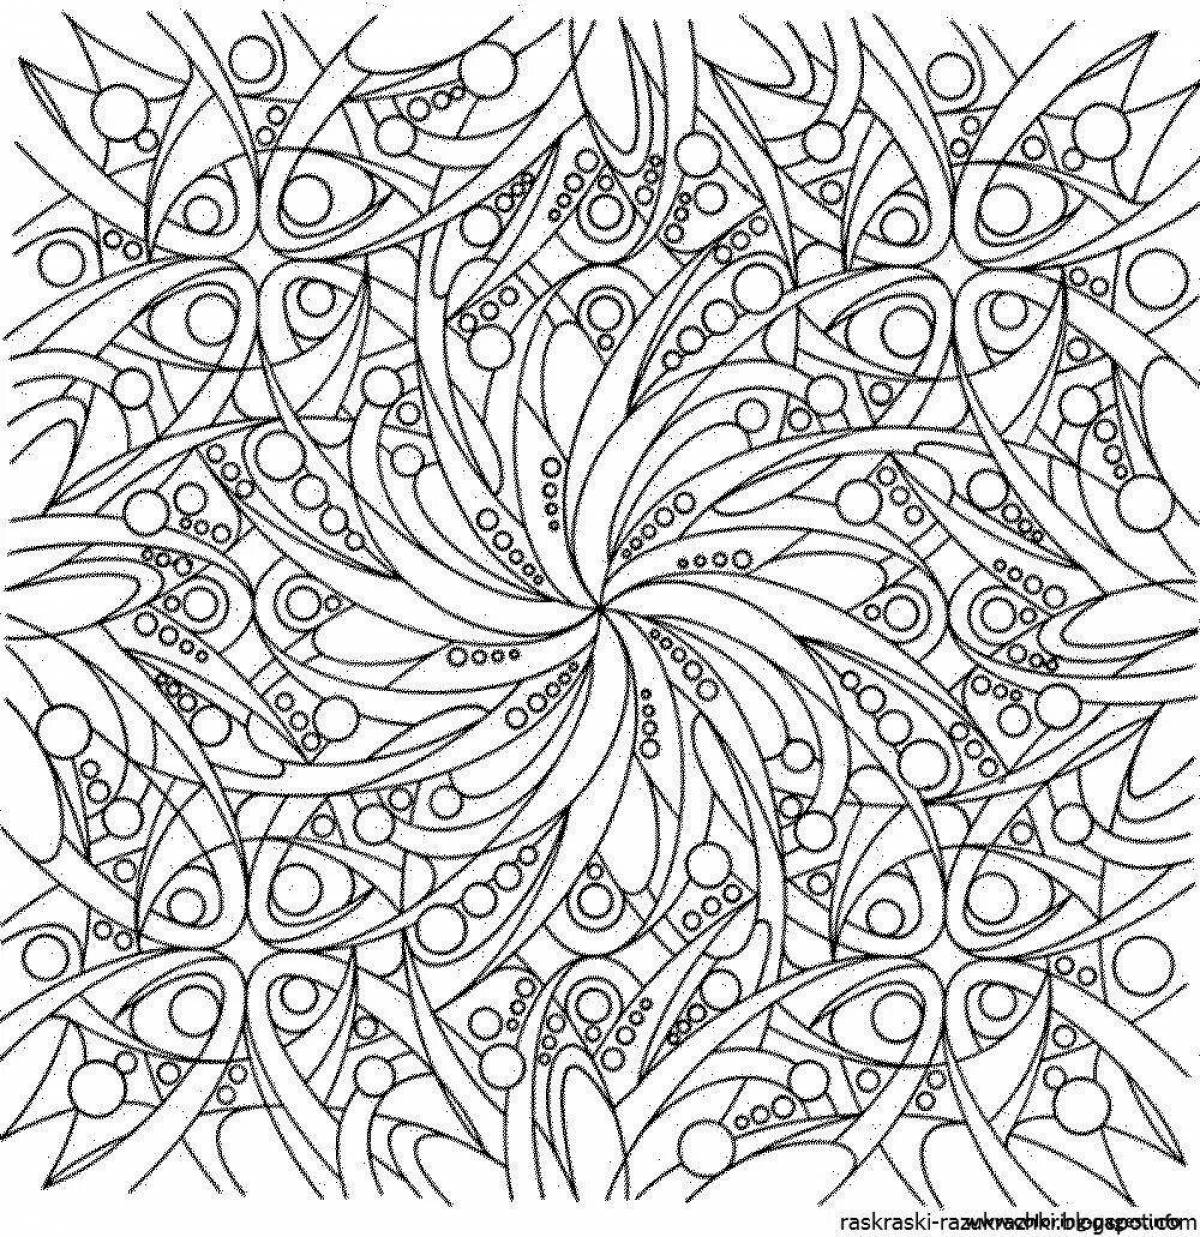 Stimulated coloring book for adults